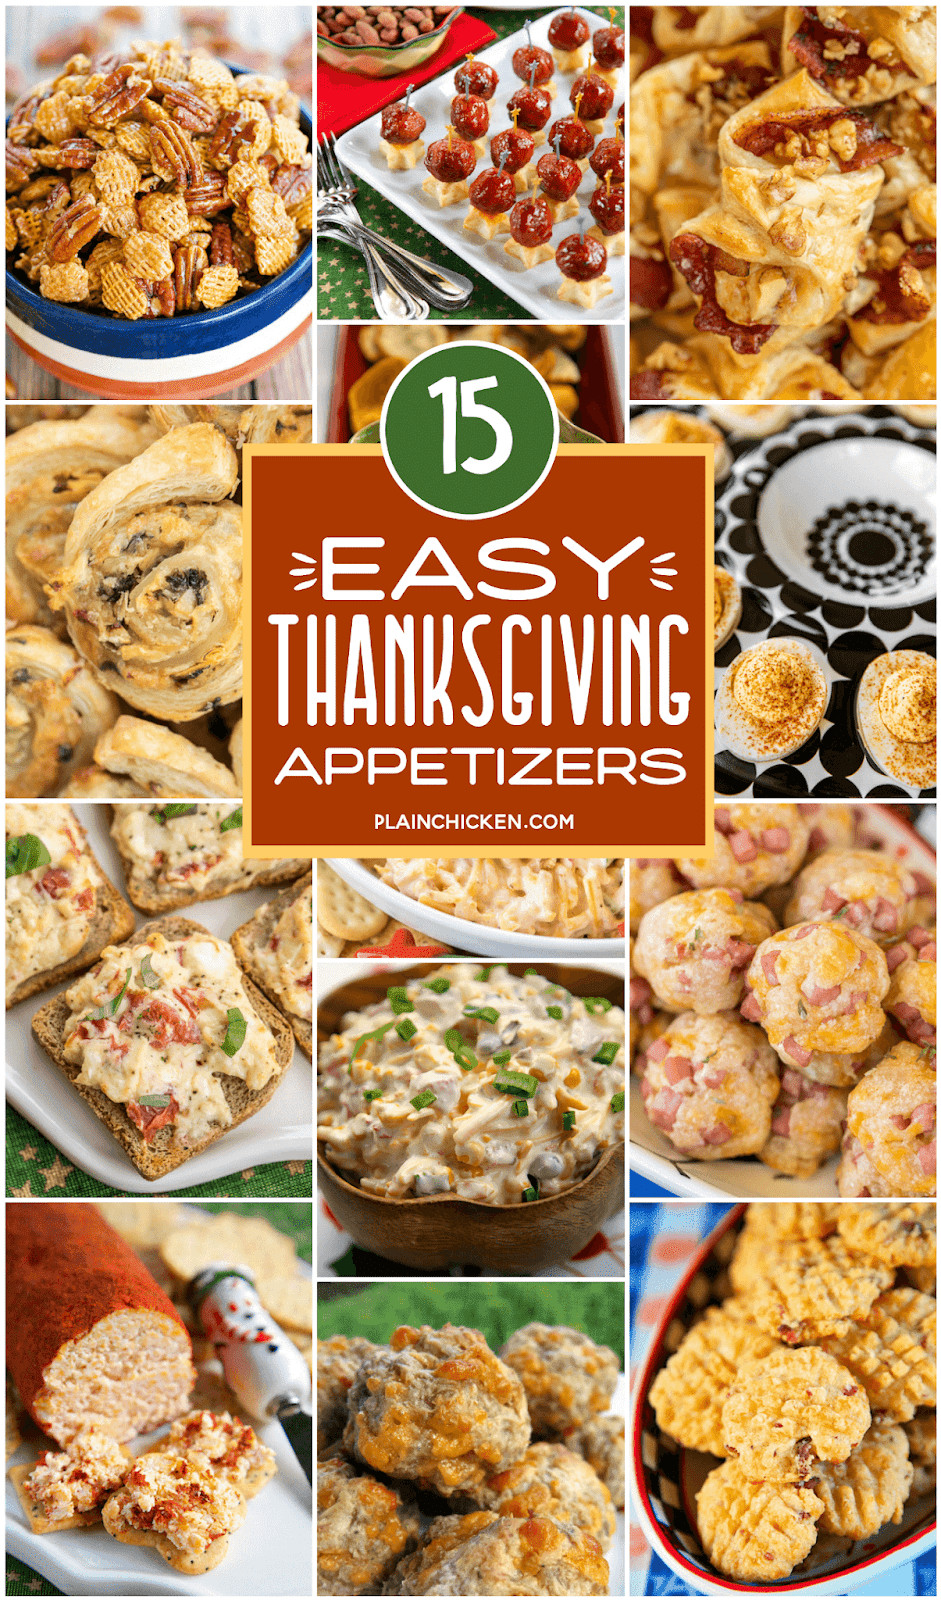 Thanksgiving Day Appetizers
 15 Easy Thanksgiving Appetizers something for everyone